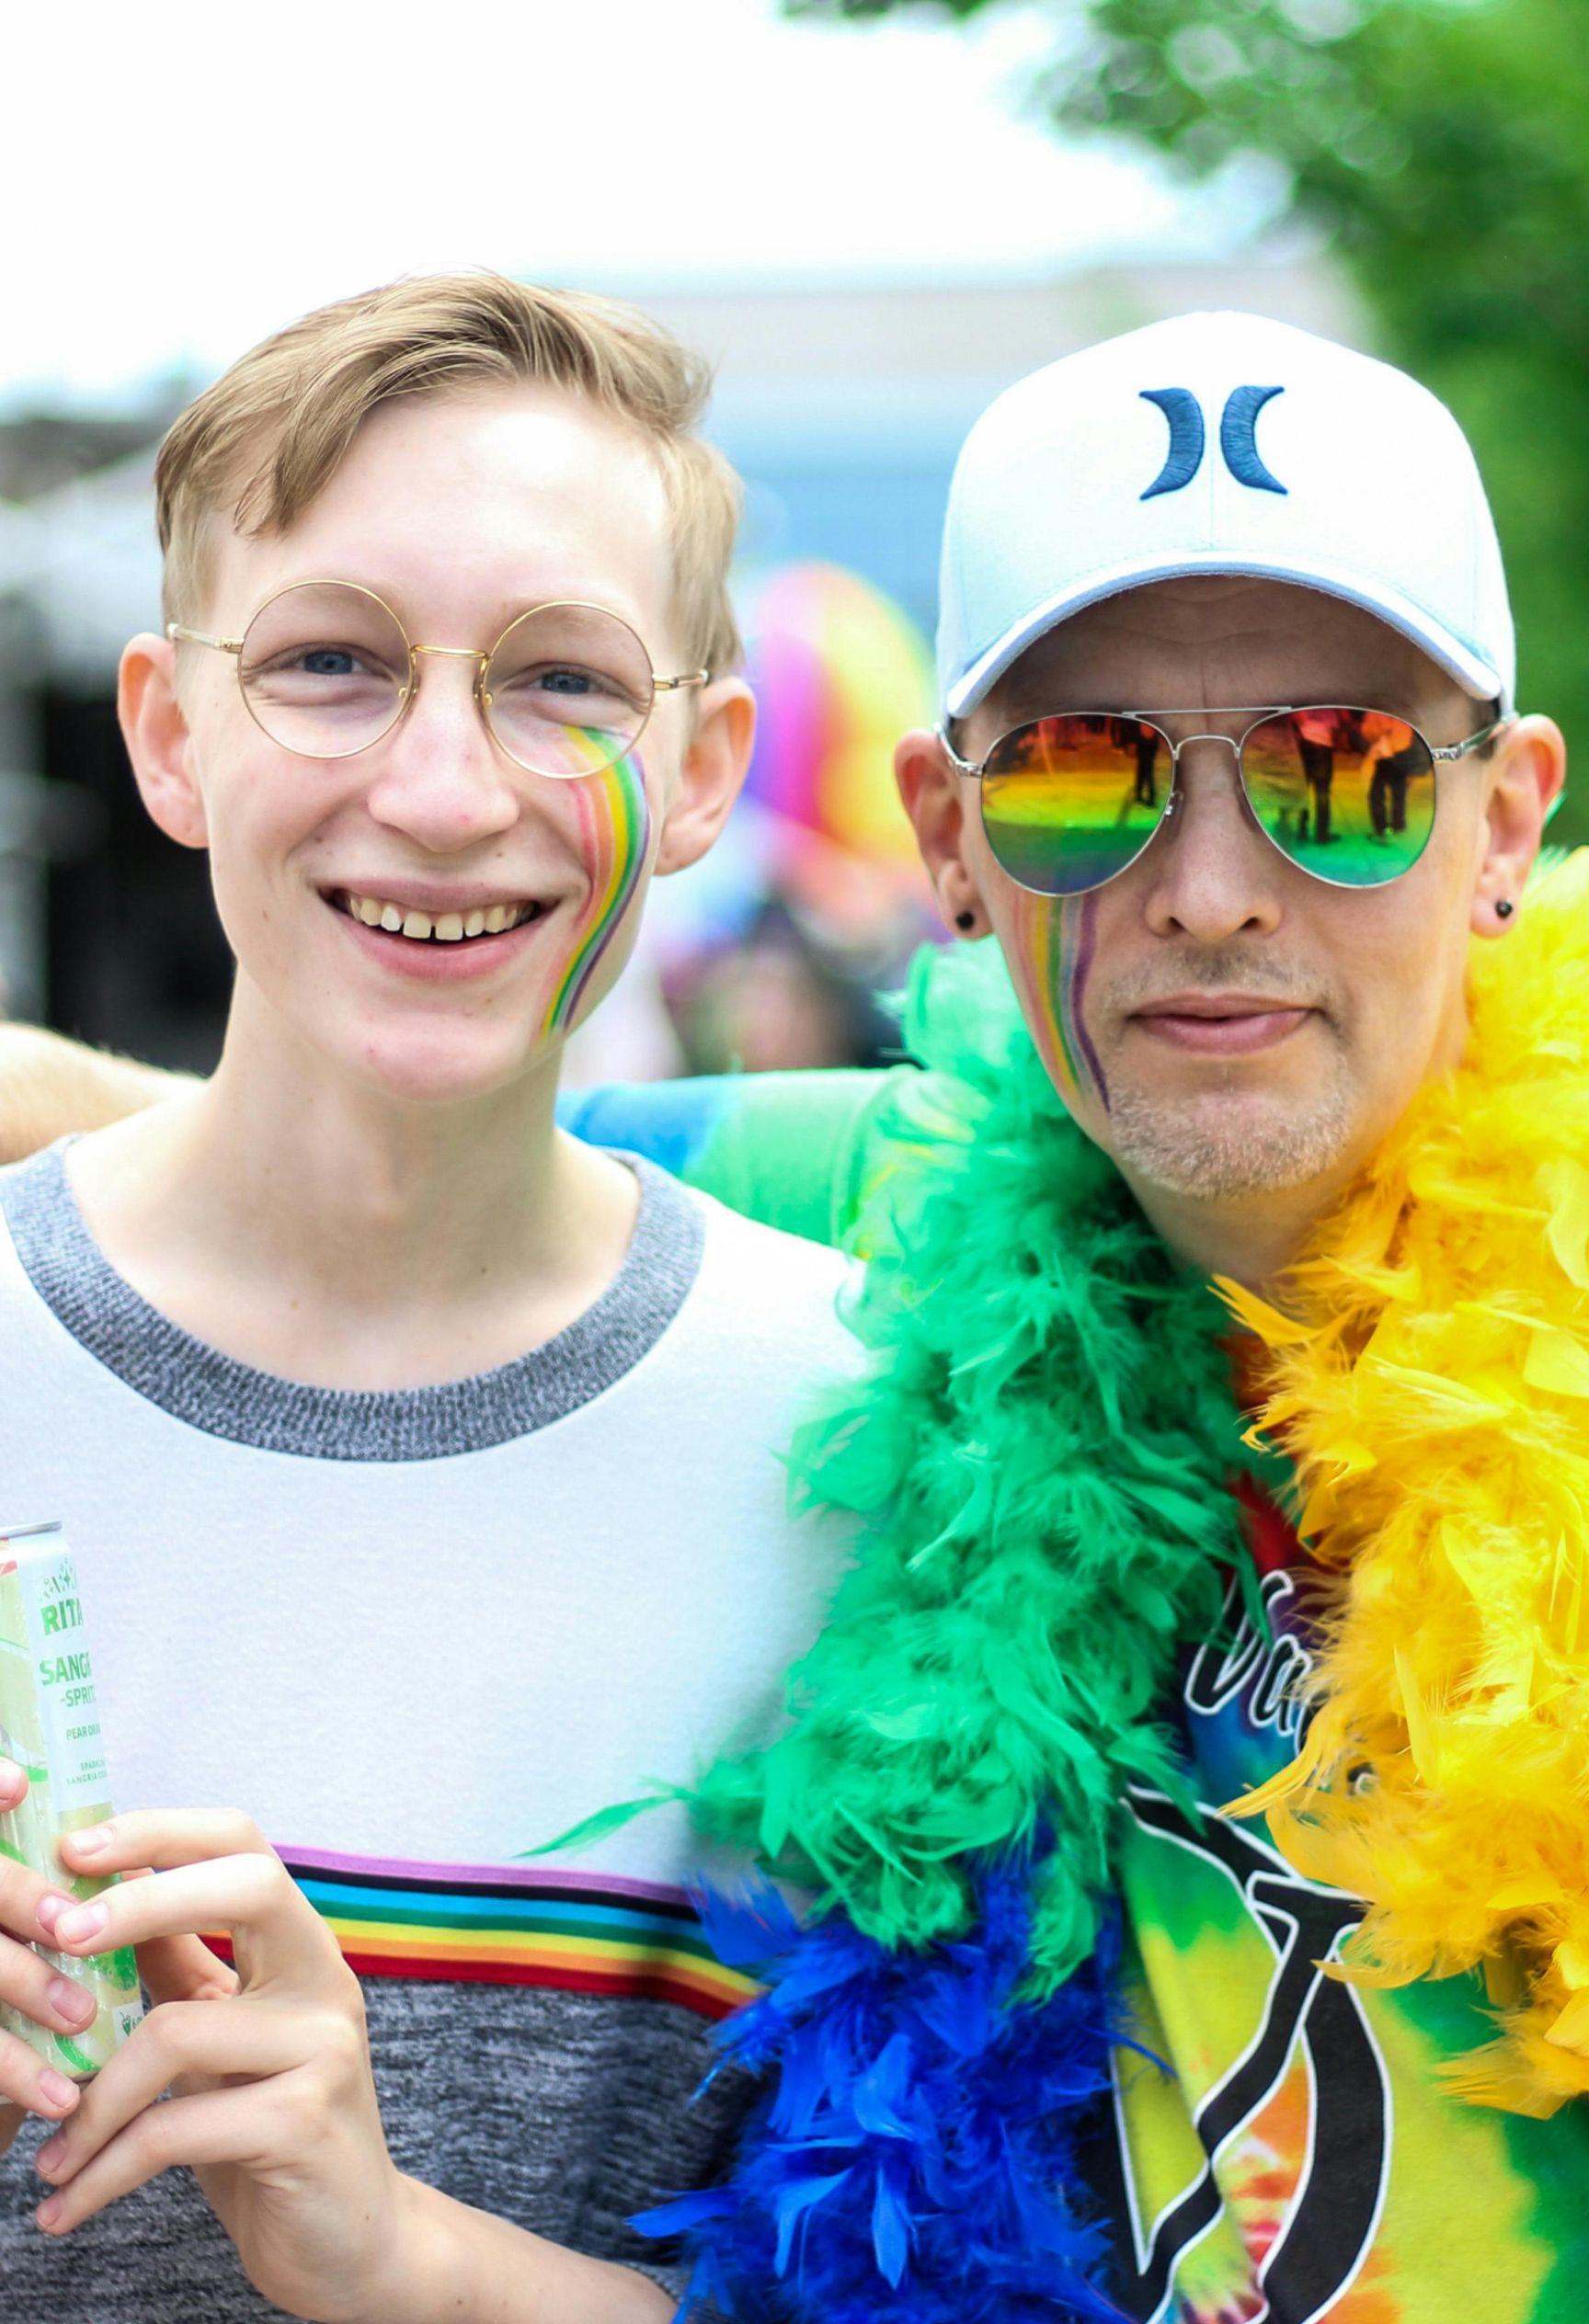 A man and a teenage boy pose for a photo. They both have rainbows painted on their cheeks, and the man is wearing a rainbow feather boa.